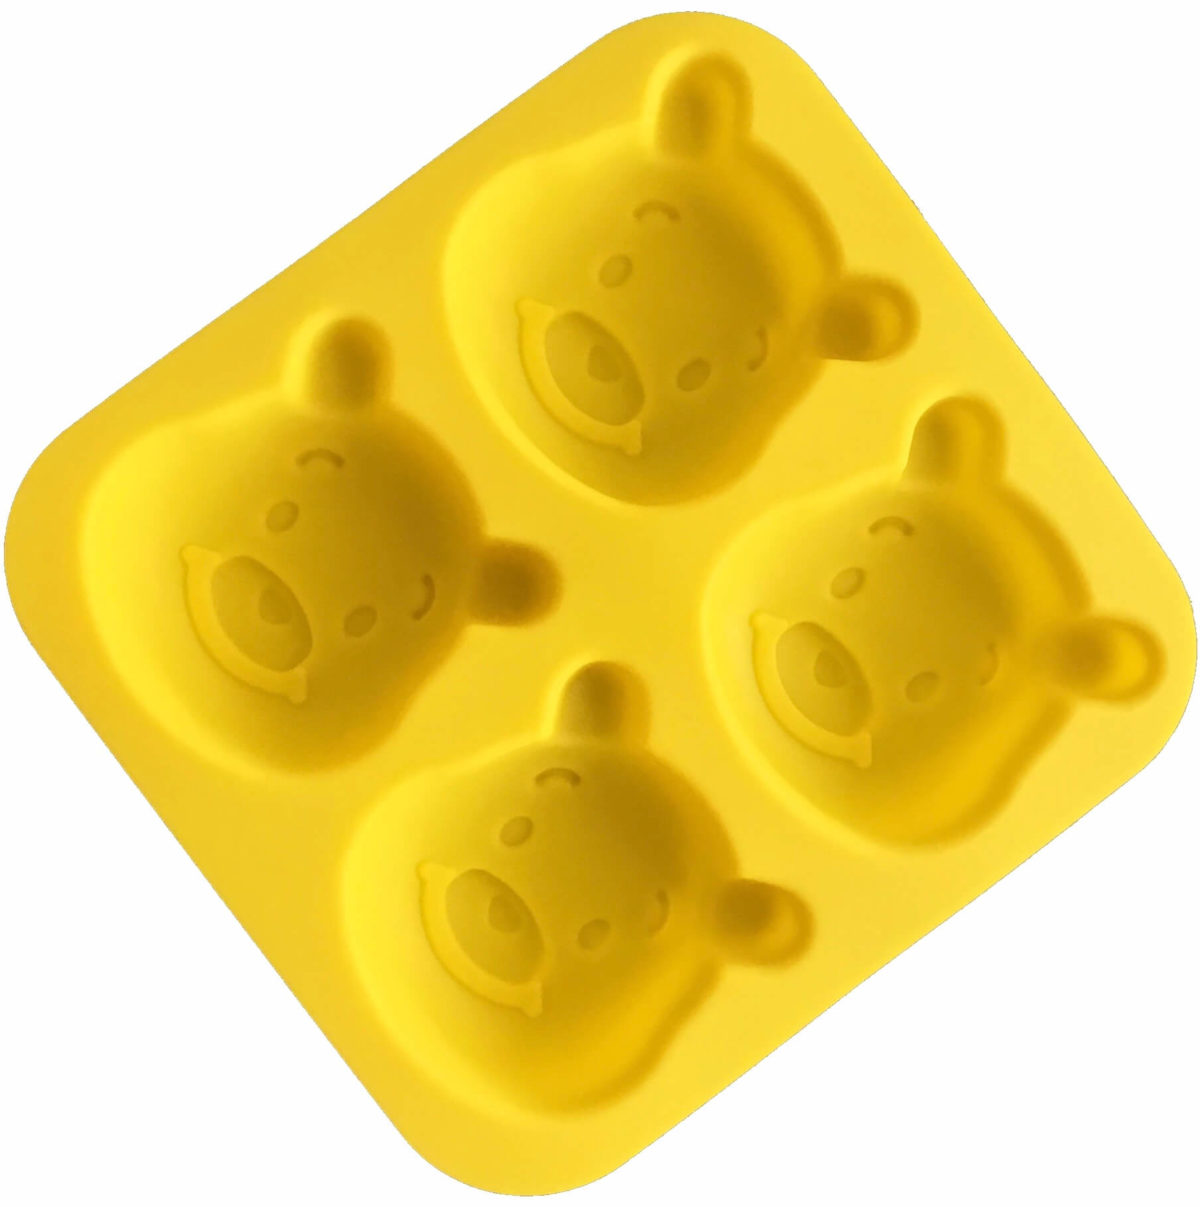 back of yellow four cavity silicone mould with identical pooh bear-shaped cavites